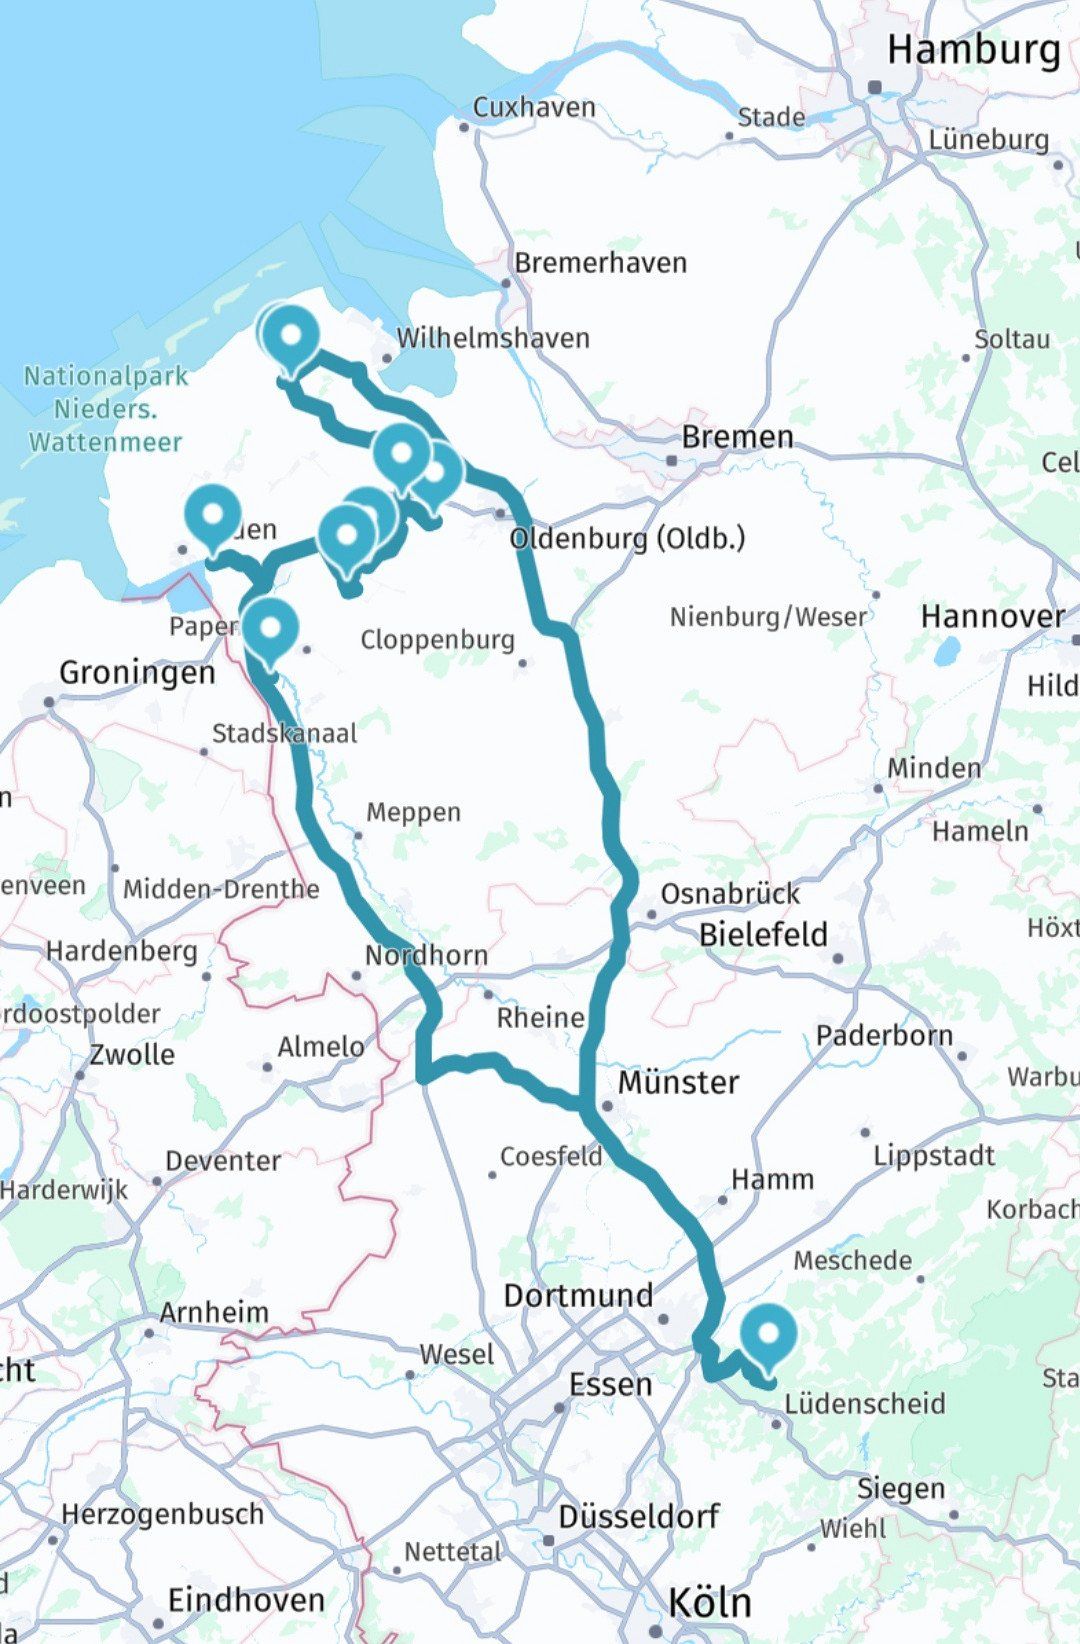 Short trip from the Sauerland to the North Sea region